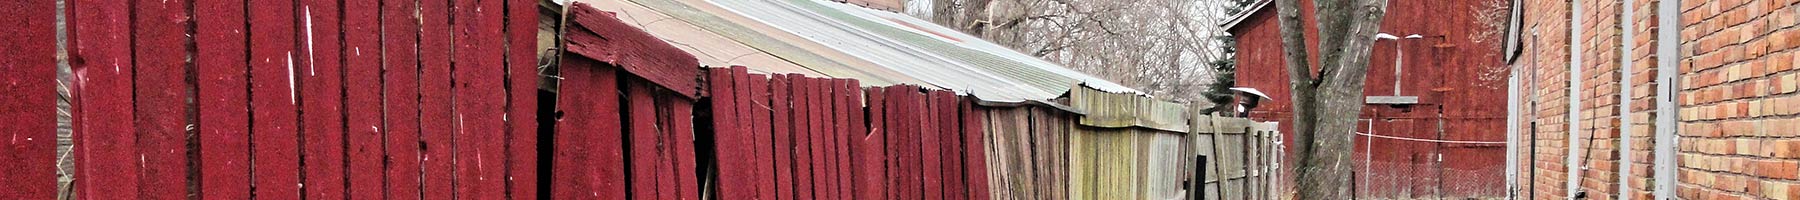 red wooden fence between two buildings